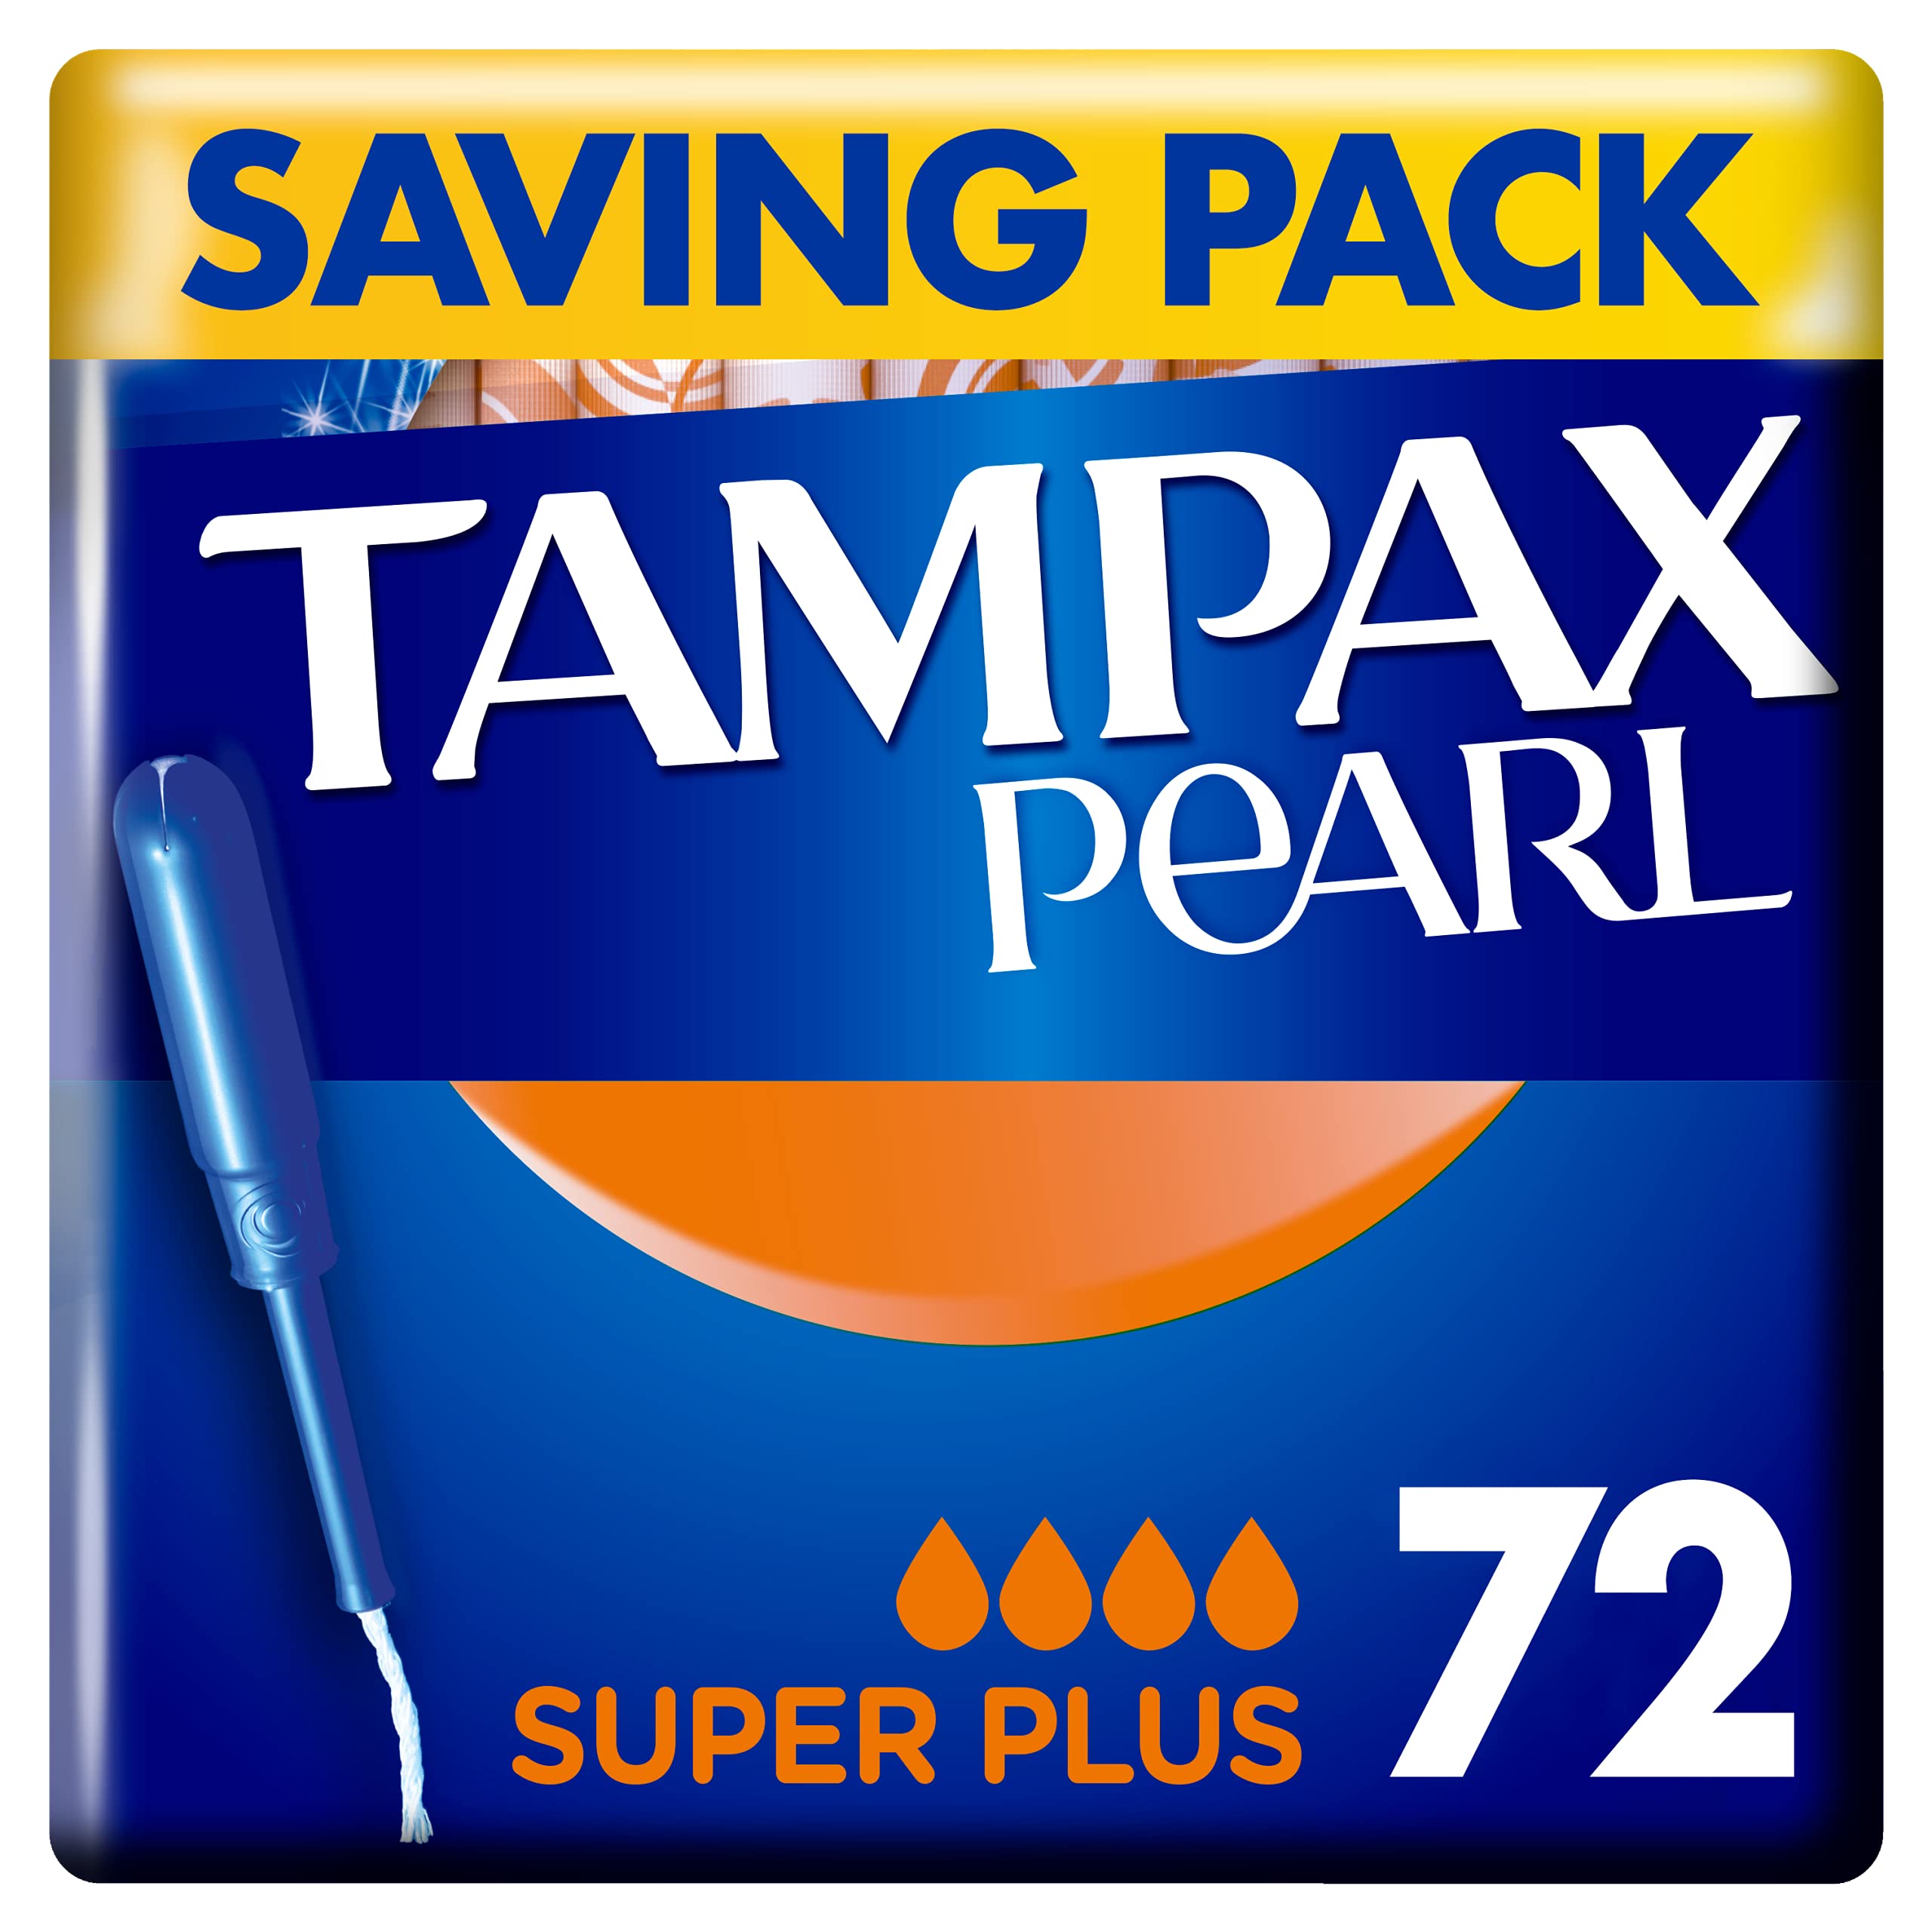 Tampax Pearl Tampons, Super Plus With Applicator, 72 Tampons (18 x 4 Packs), Leak Protection And Discretion, Super Absorbent